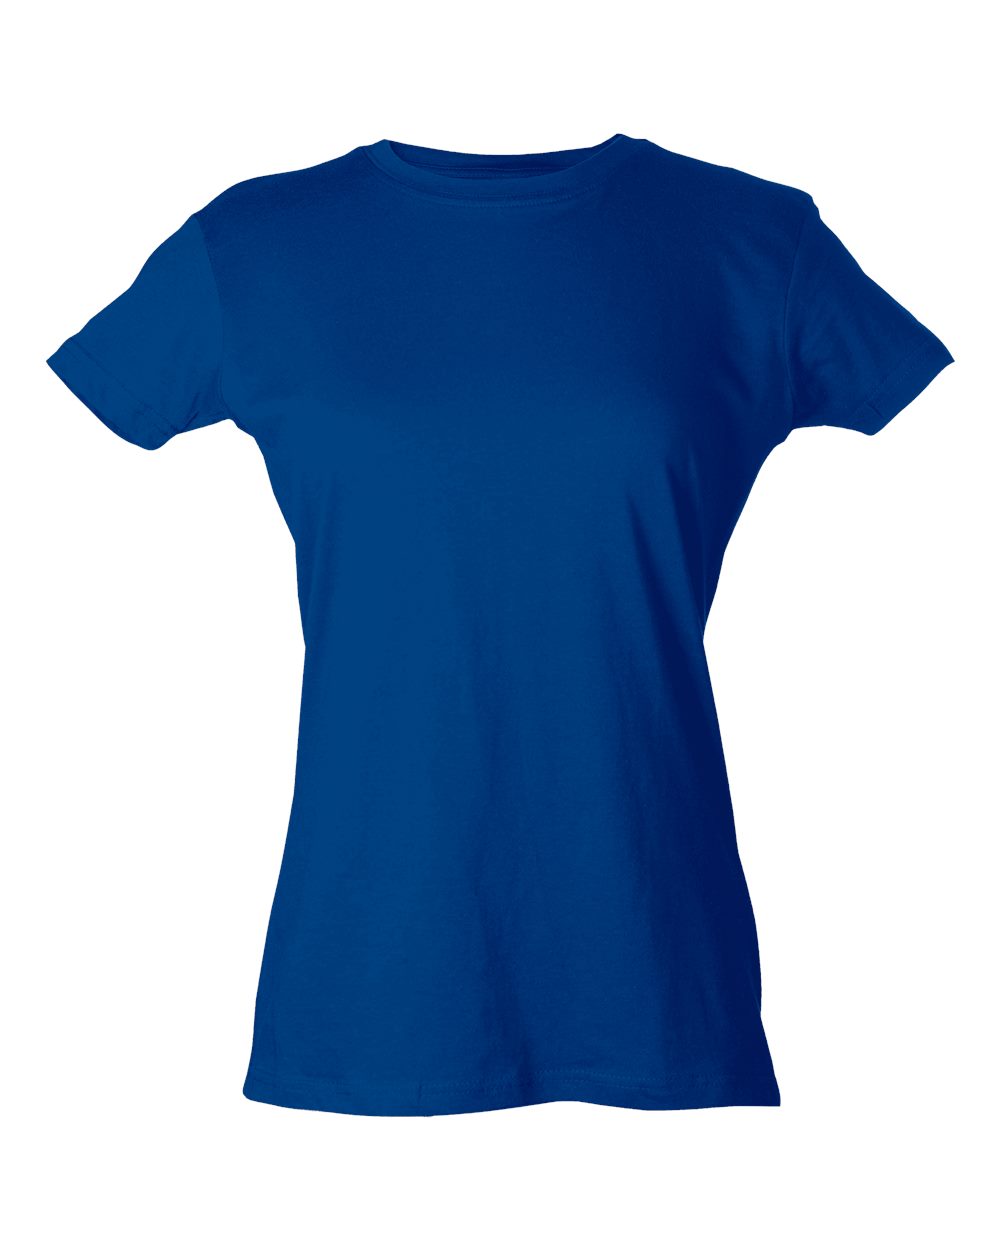 Fitkin women's blue round neck back laser cut design full sleeves t-shirt -  Clothing & Merch - by Fitkin Factory